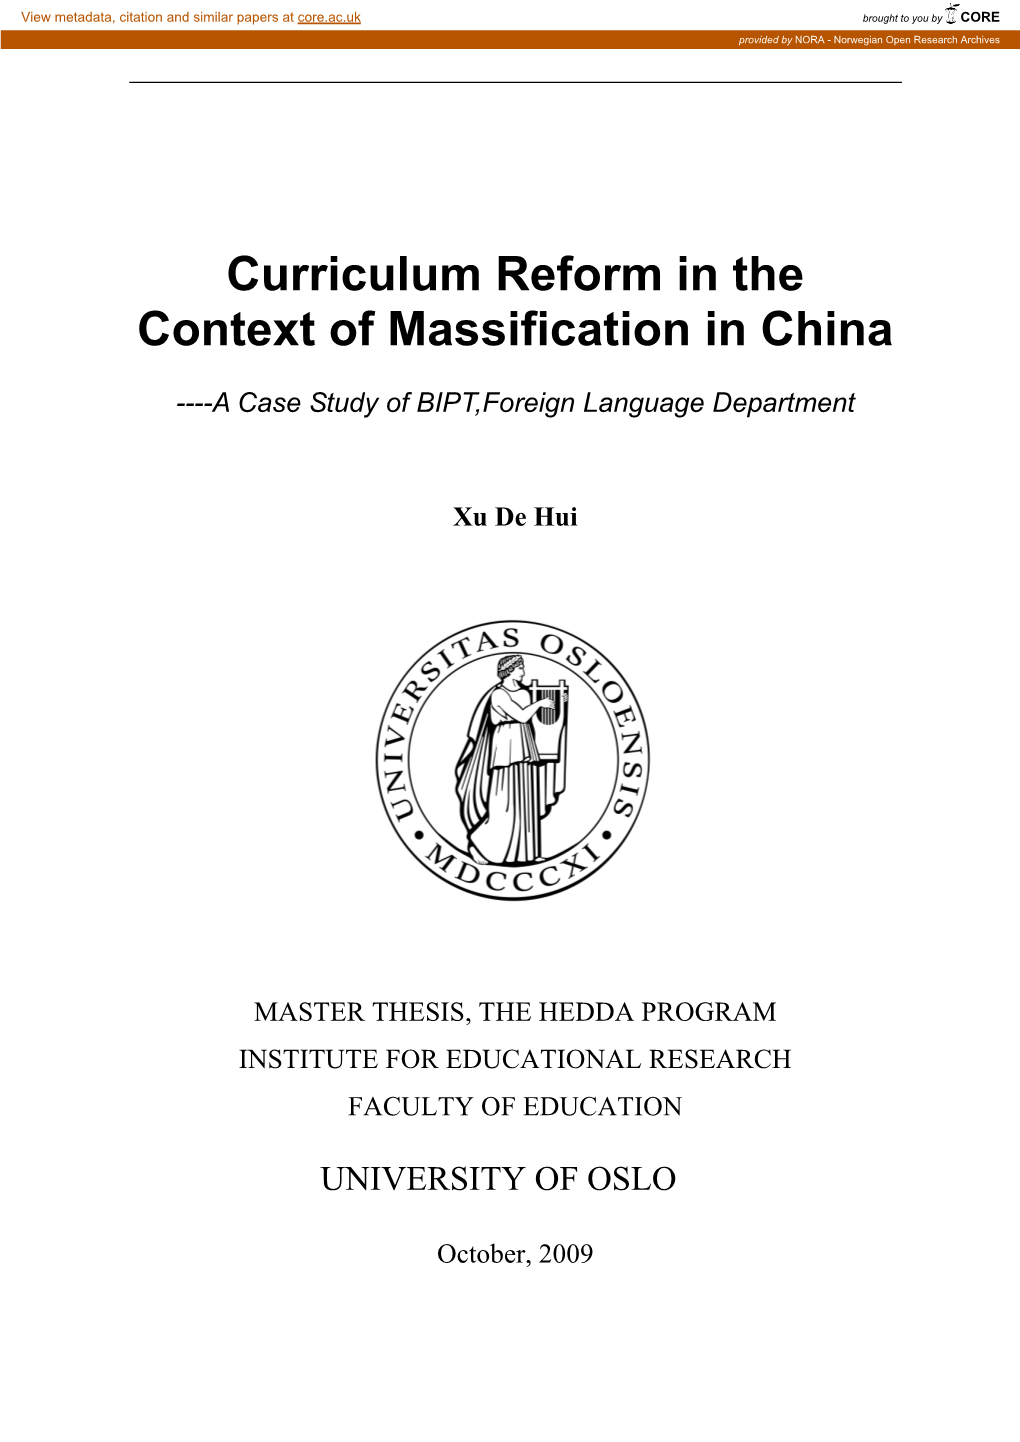 Curriculum Reform in the Context of Massification in China